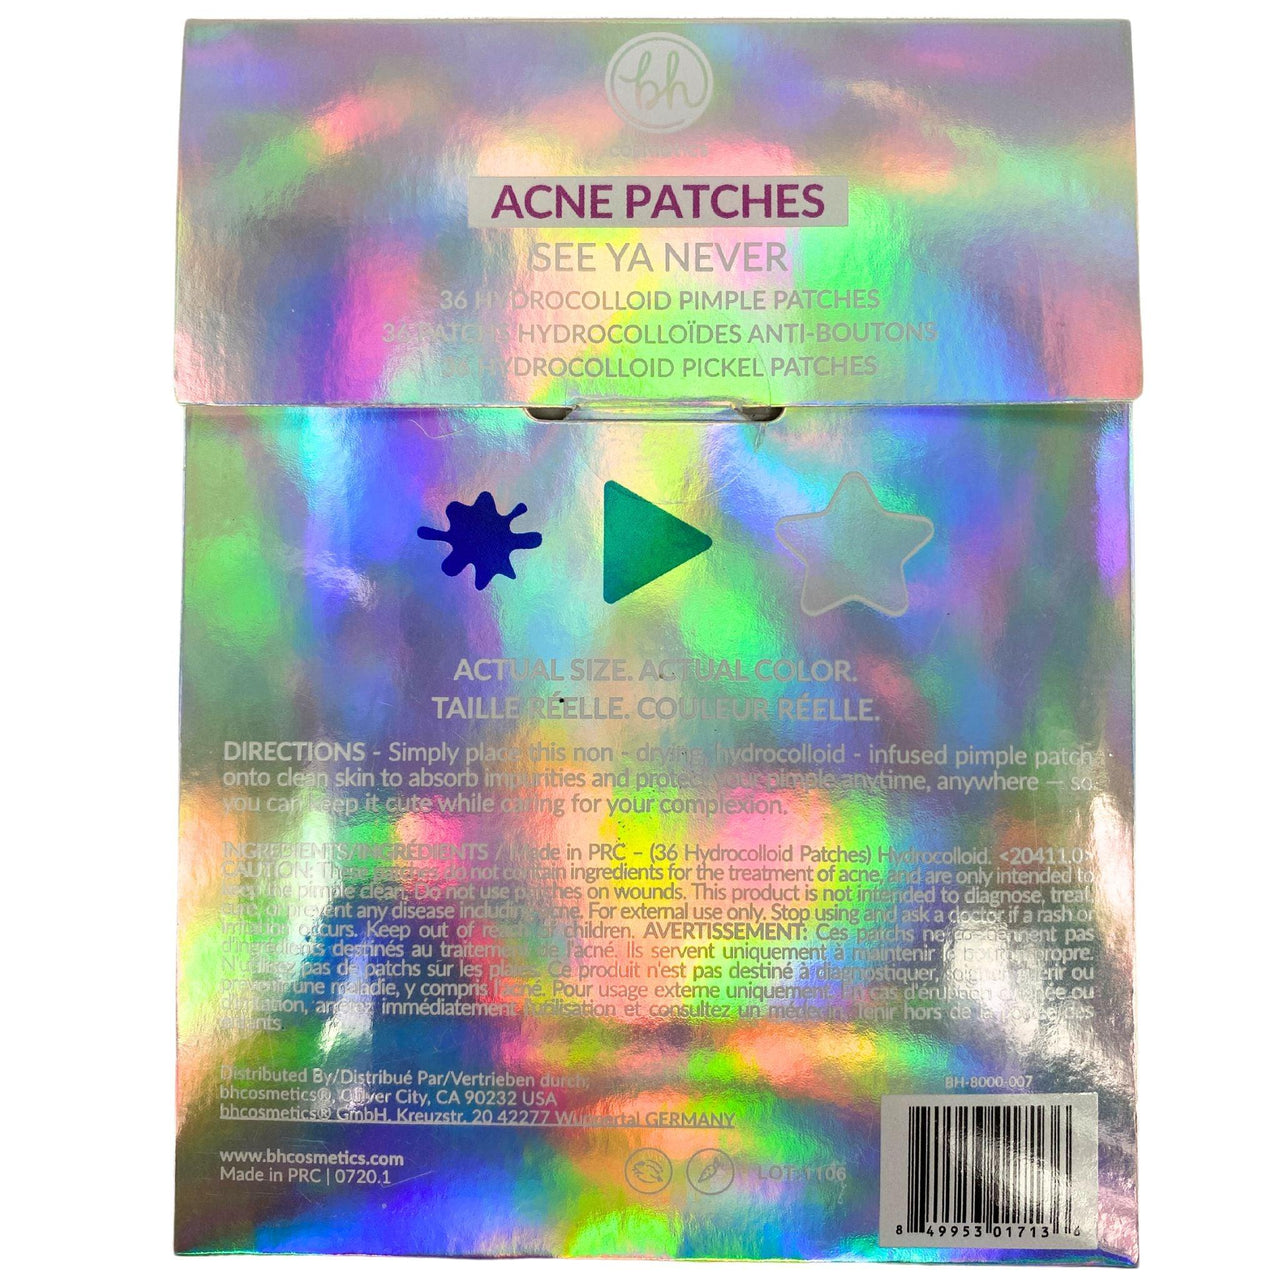 BH Cosmetics Acne Patches See Ya Never! 36 Hydrocolloid Pimple Patches (39 Pcs Lot) - Discount Wholesalers Inc